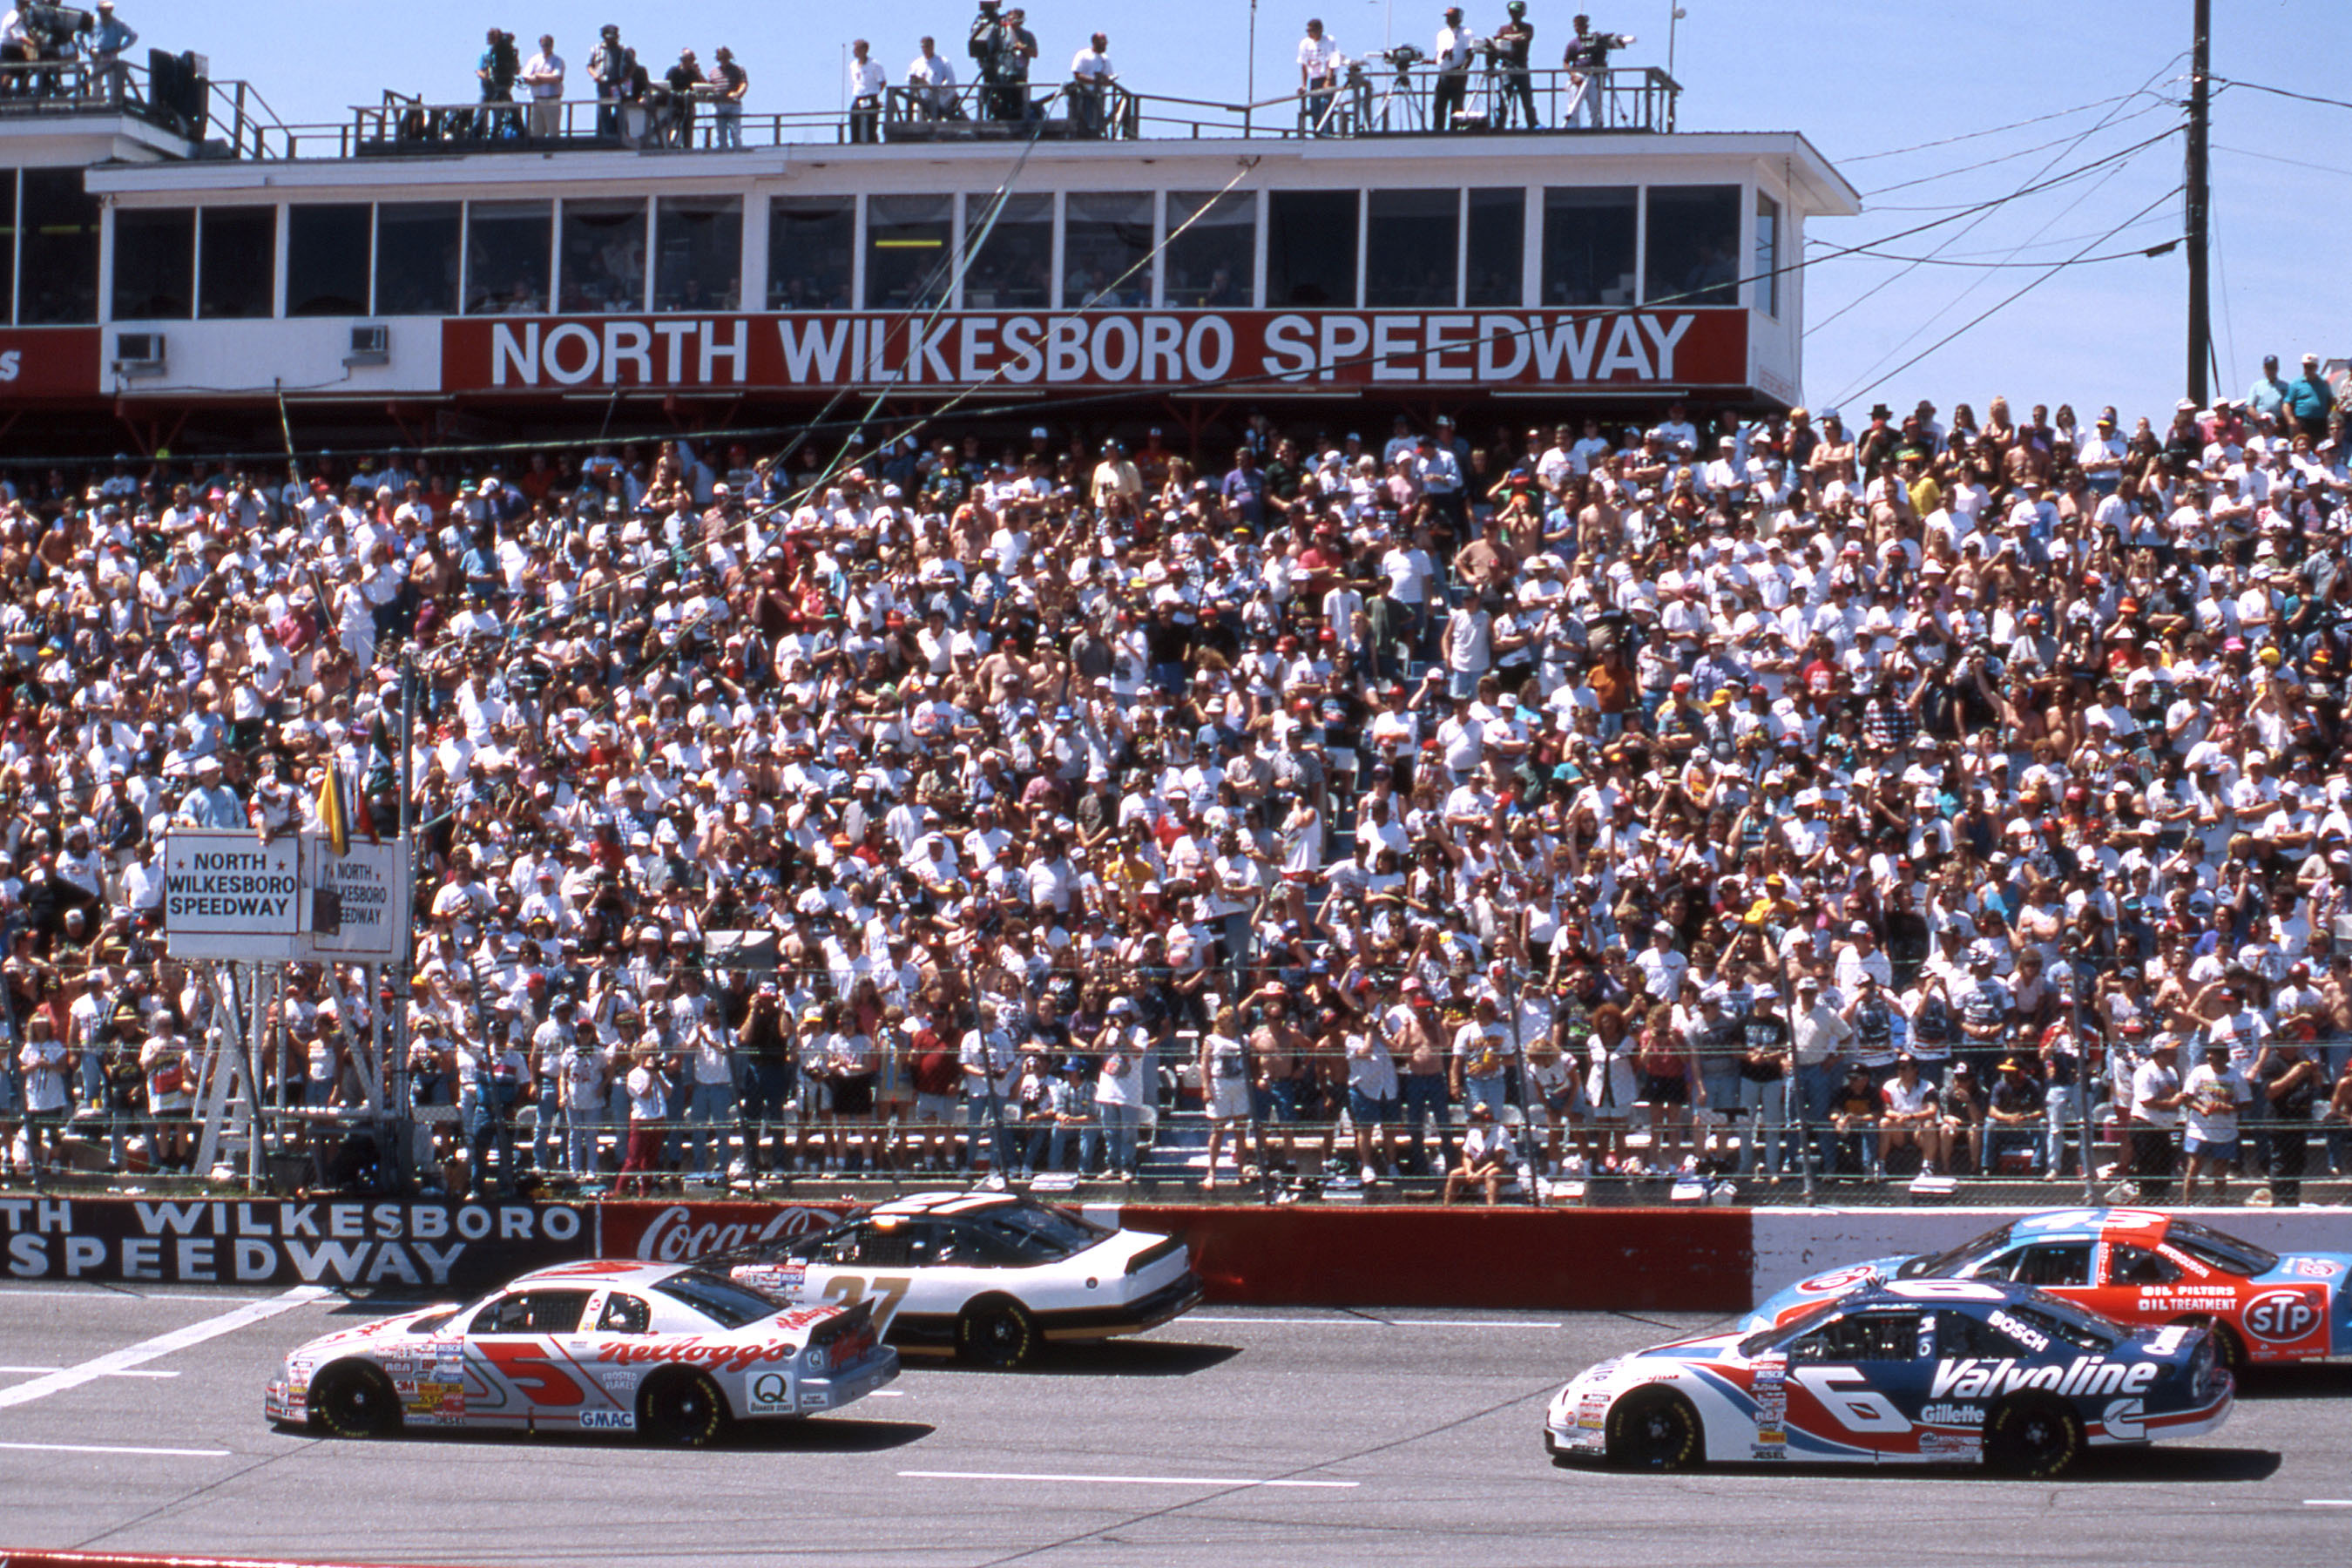 NORTH WILKESBORO, NC - APRIL 14, 1996: Terry Labonte (No 5) and Elton Sawyer (No 27) bring the field to the start of the First Union 400 at North Wilkesboro Speedway. Mark Martin is in No. 6 and the No. 43 is Bobby Hamilton. (Photo by ISC Images & Archives via Getty Images)